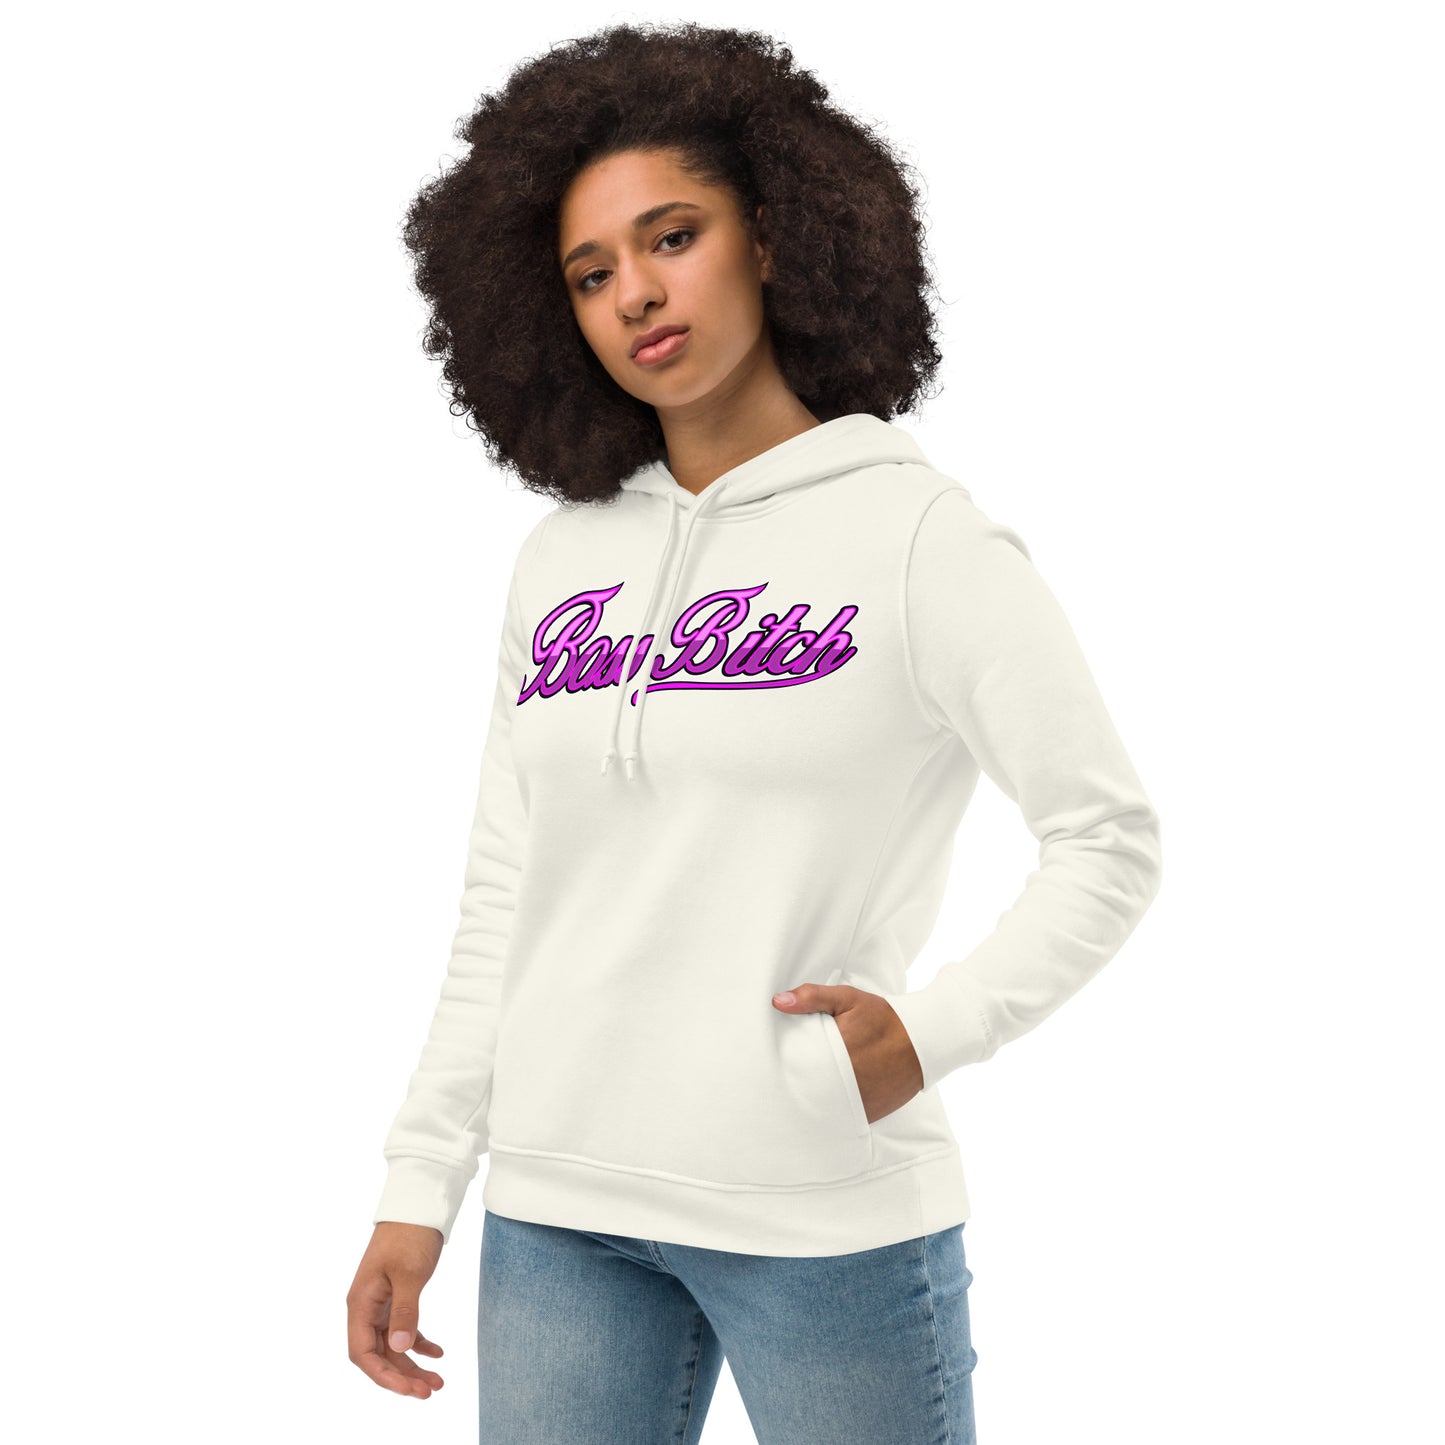 Boss Bitch Women's eco fitted hoodie